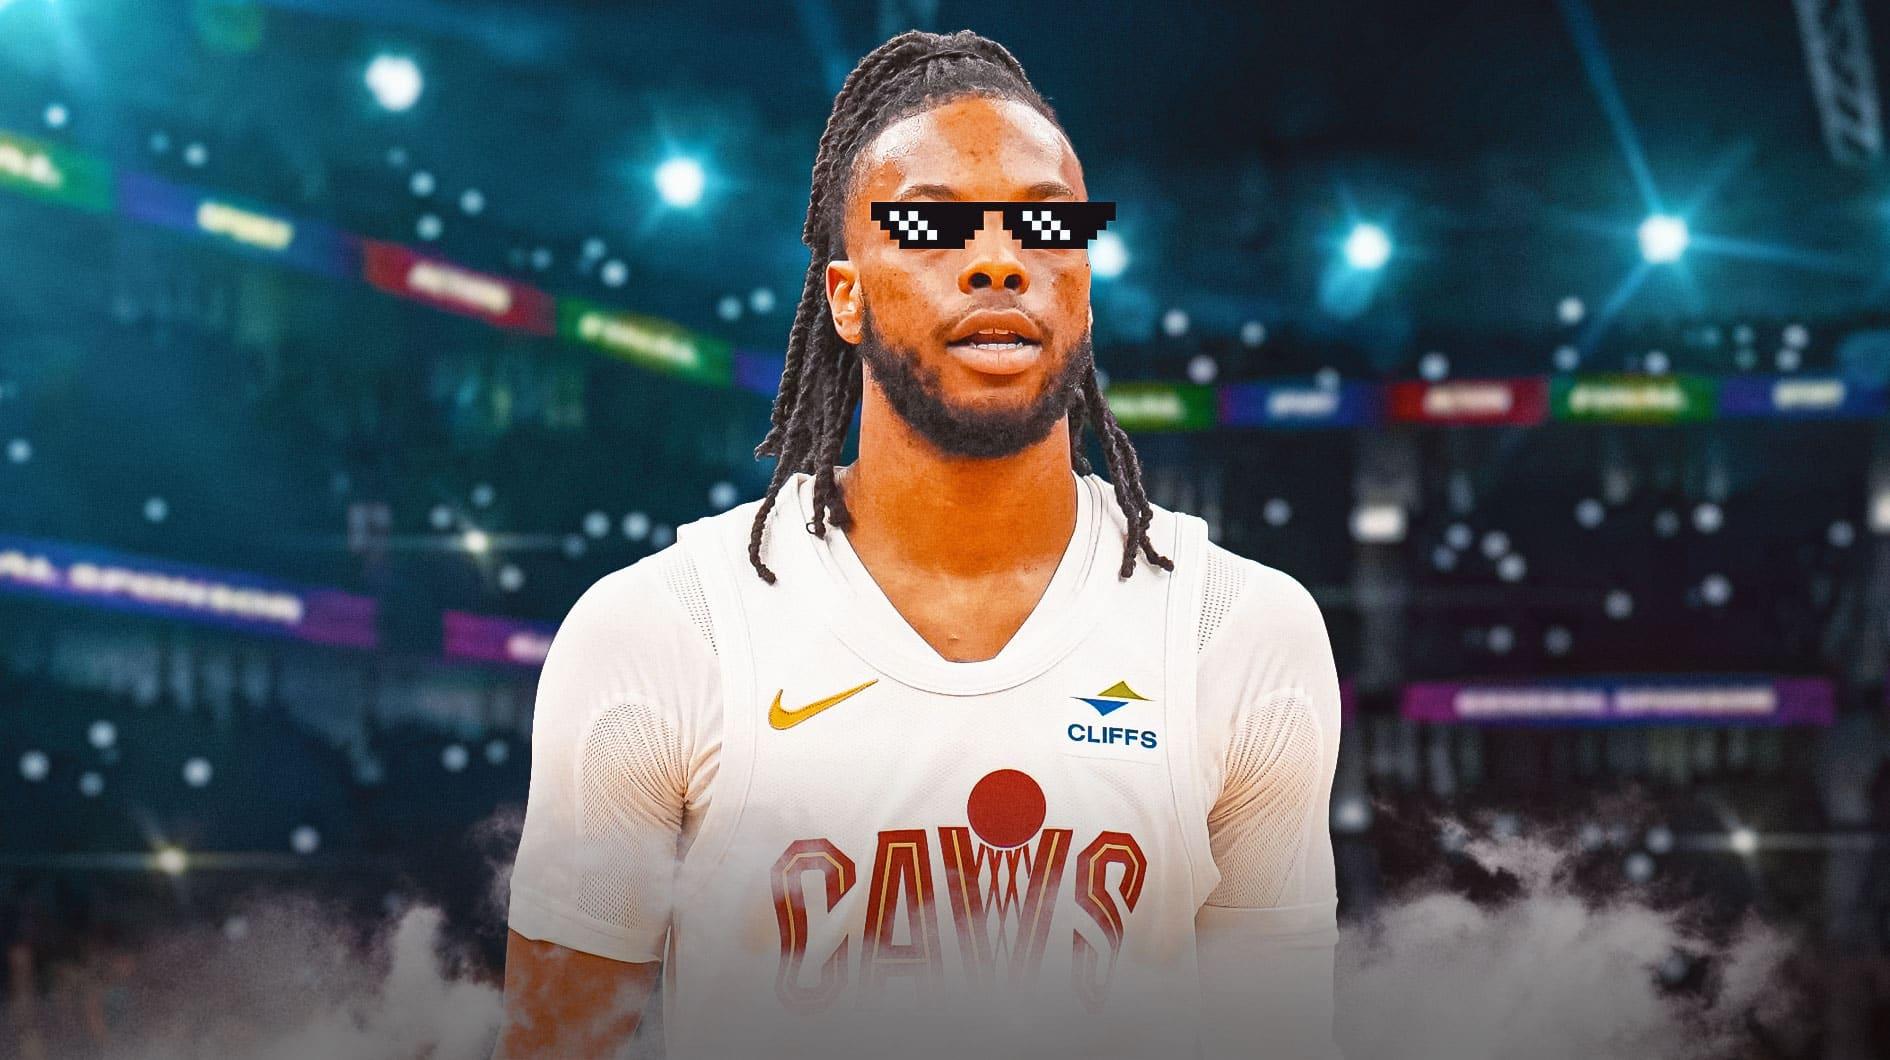 Darius Garland (Cavs) wearing deal with it shades